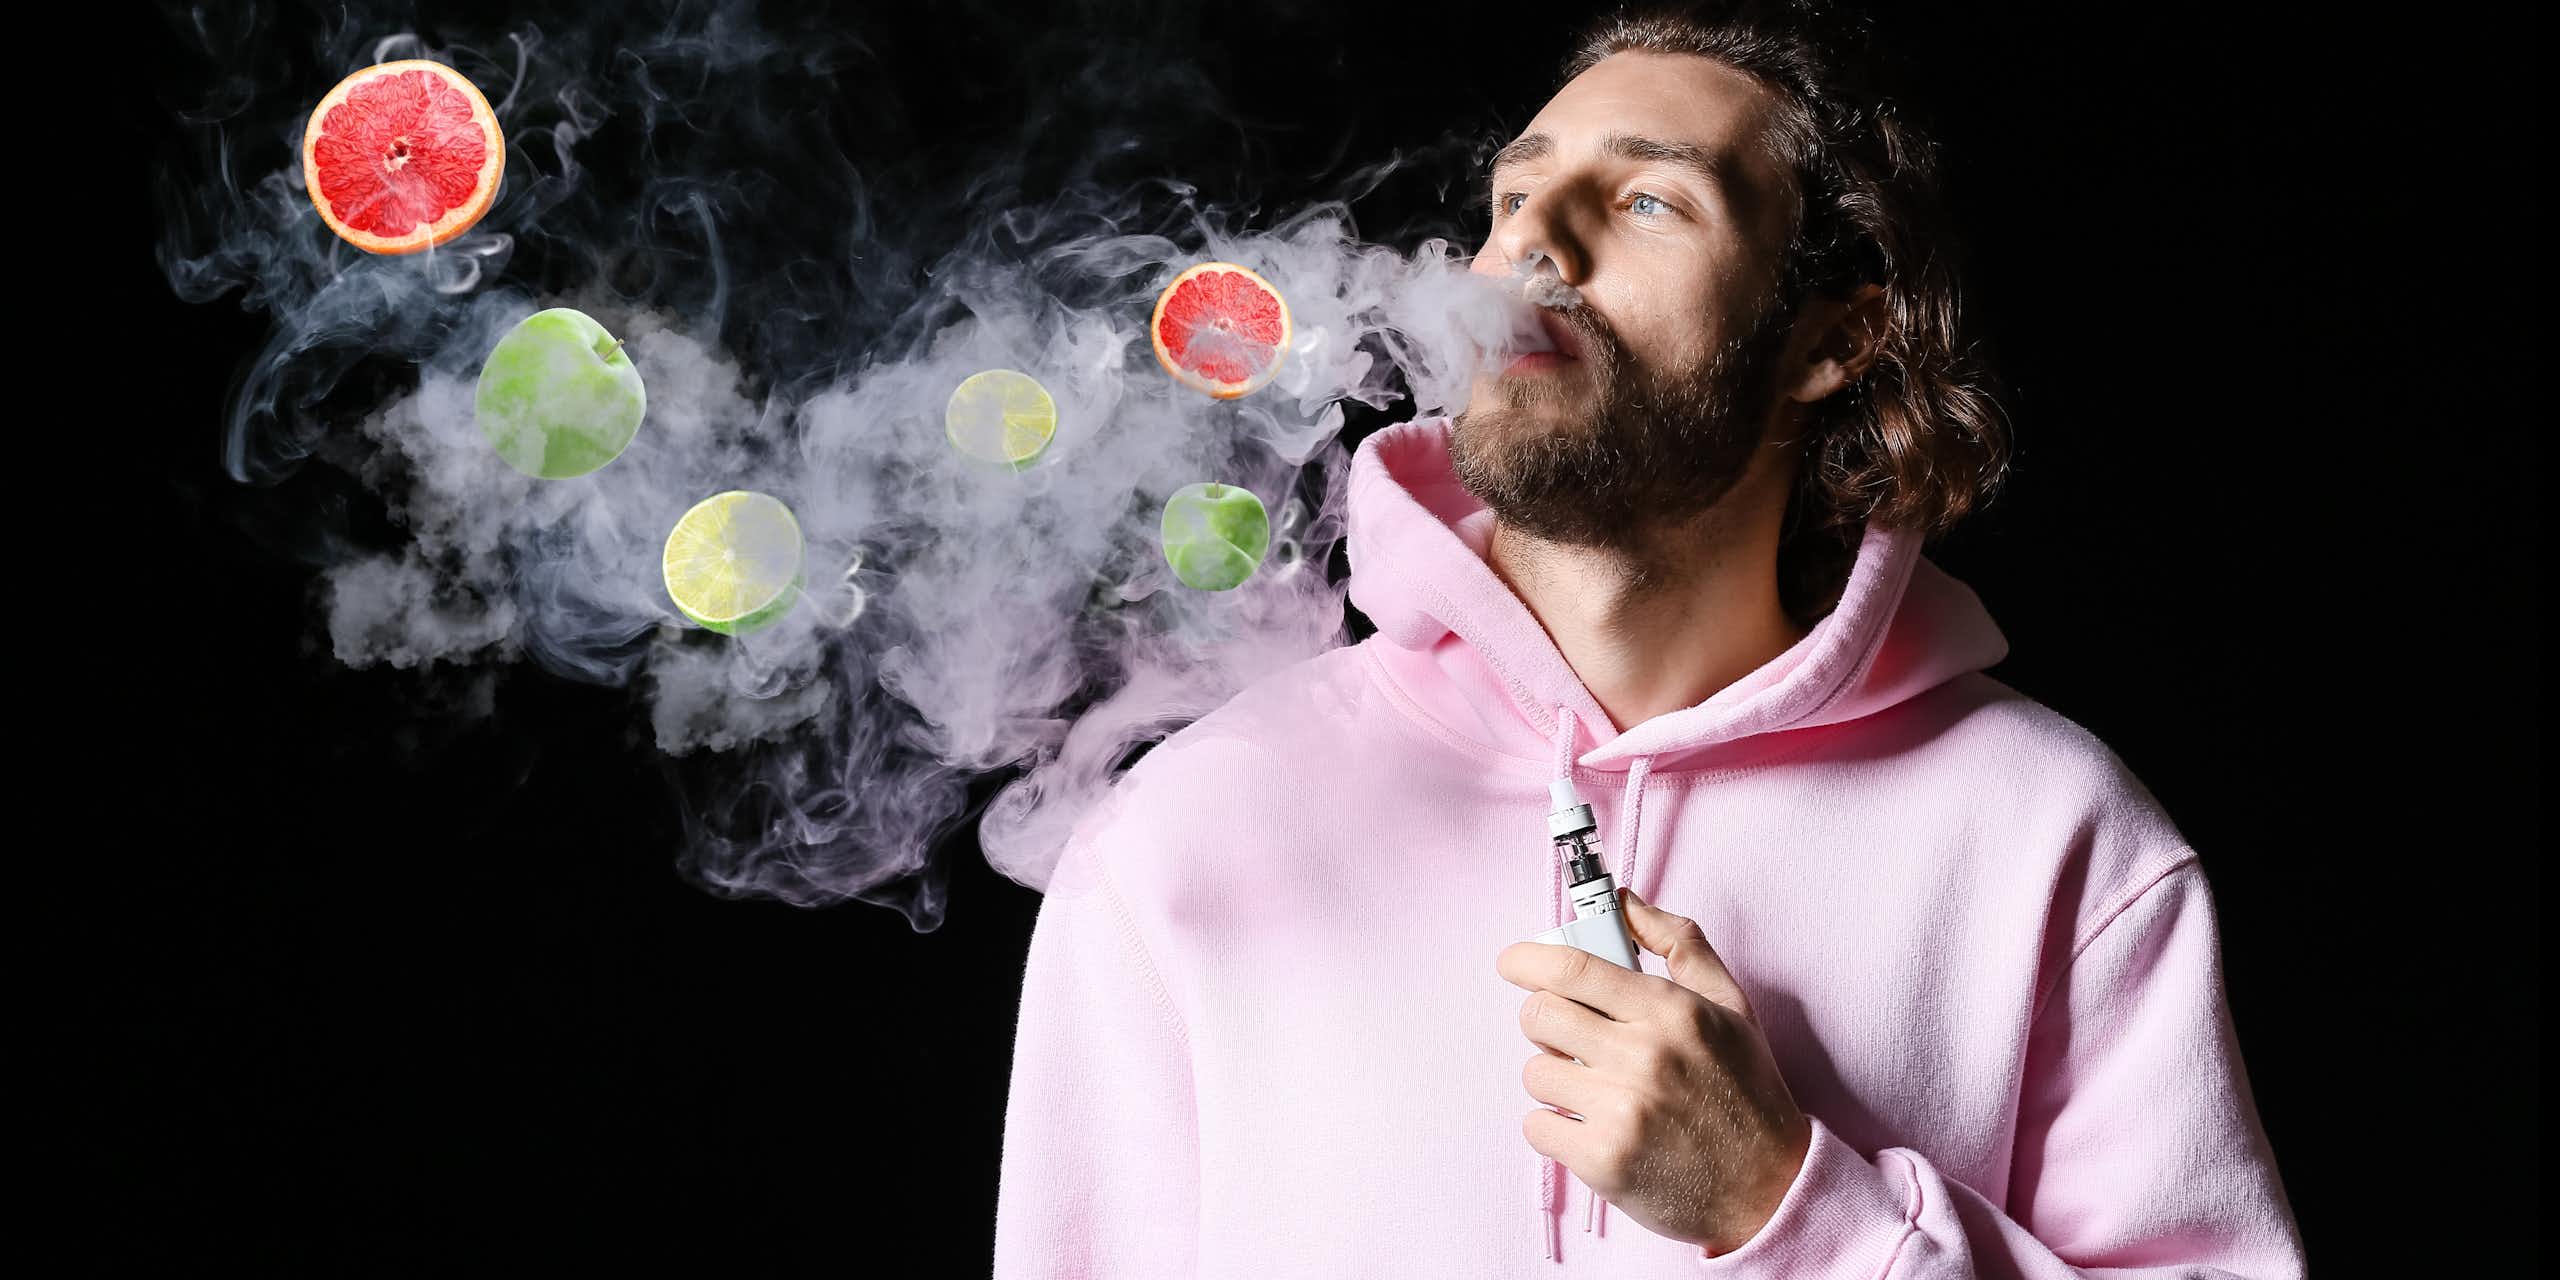 Flavoured vapes may produce many harmful chemicals when e-liquids are heated – new research